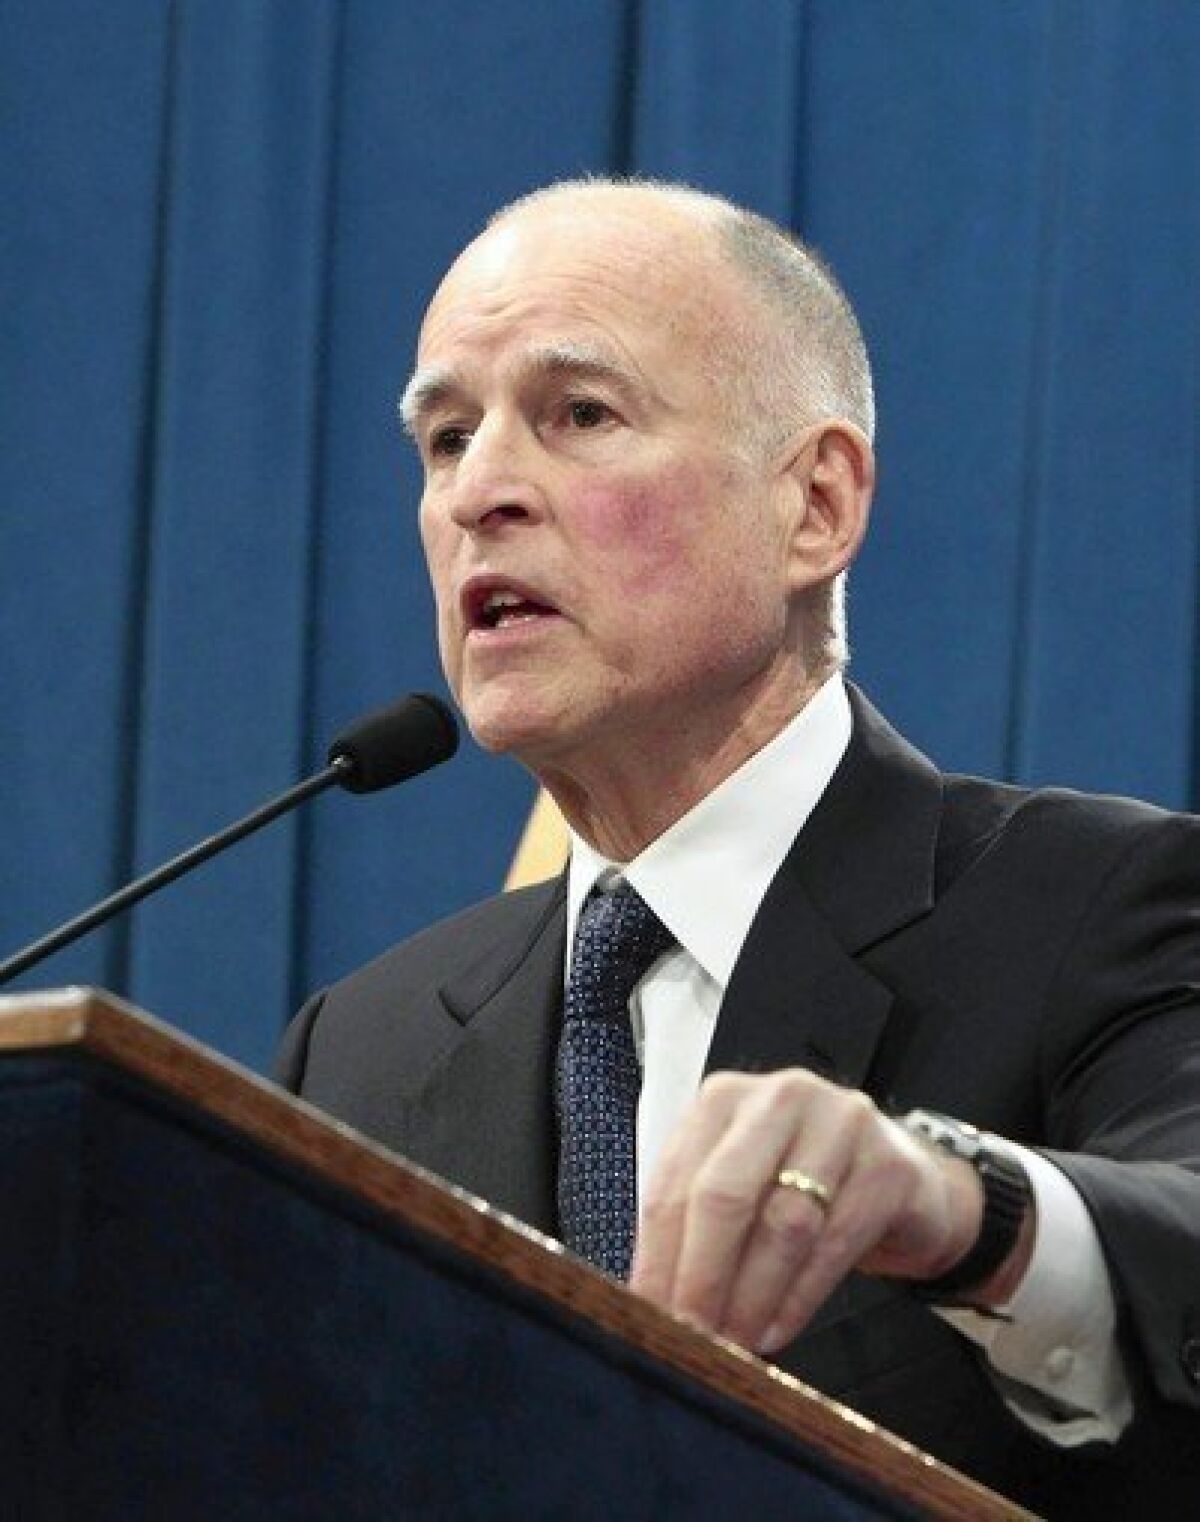 Gov. Jerry Brown and a number of GOP governors are struggling with healthcare systems overtaxed by large numbers of uninsured residents.